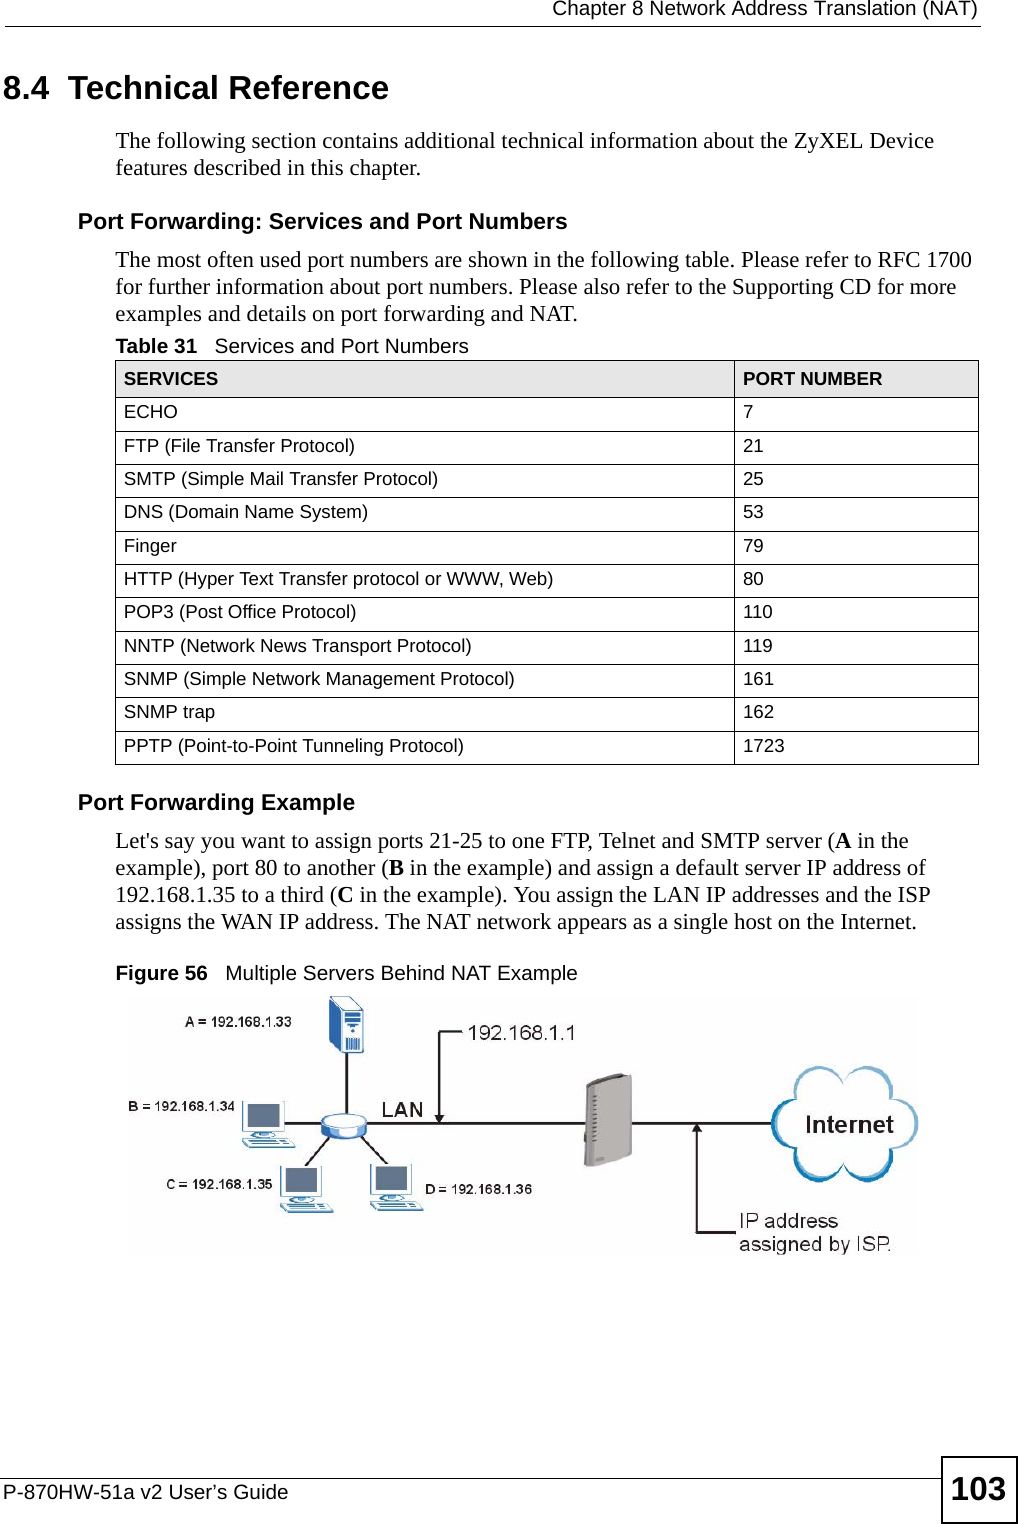  Chapter 8 Network Address Translation (NAT)P-870HW-51a v2 User’s Guide 1038.4  Technical ReferenceThe following section contains additional technical information about the ZyXEL Device features described in this chapter.Port Forwarding: Services and Port NumbersThe most often used port numbers are shown in the following table. Please refer to RFC 1700 for further information about port numbers. Please also refer to the Supporting CD for more examples and details on port forwarding and NAT.Port Forwarding ExampleLet&apos;s say you want to assign ports 21-25 to one FTP, Telnet and SMTP server (A in the example), port 80 to another (B in the example) and assign a default server IP address of 192.168.1.35 to a third (C in the example). You assign the LAN IP addresses and the ISP assigns the WAN IP address. The NAT network appears as a single host on the Internet.Figure 56   Multiple Servers Behind NAT ExampleTable 31   Services and Port NumbersSERVICES PORT NUMBERECHO 7FTP (File Transfer Protocol) 21SMTP (Simple Mail Transfer Protocol) 25DNS (Domain Name System) 53Finger 79HTTP (Hyper Text Transfer protocol or WWW, Web) 80POP3 (Post Office Protocol) 110NNTP (Network News Transport Protocol) 119SNMP (Simple Network Management Protocol) 161SNMP trap 162PPTP (Point-to-Point Tunneling Protocol) 1723